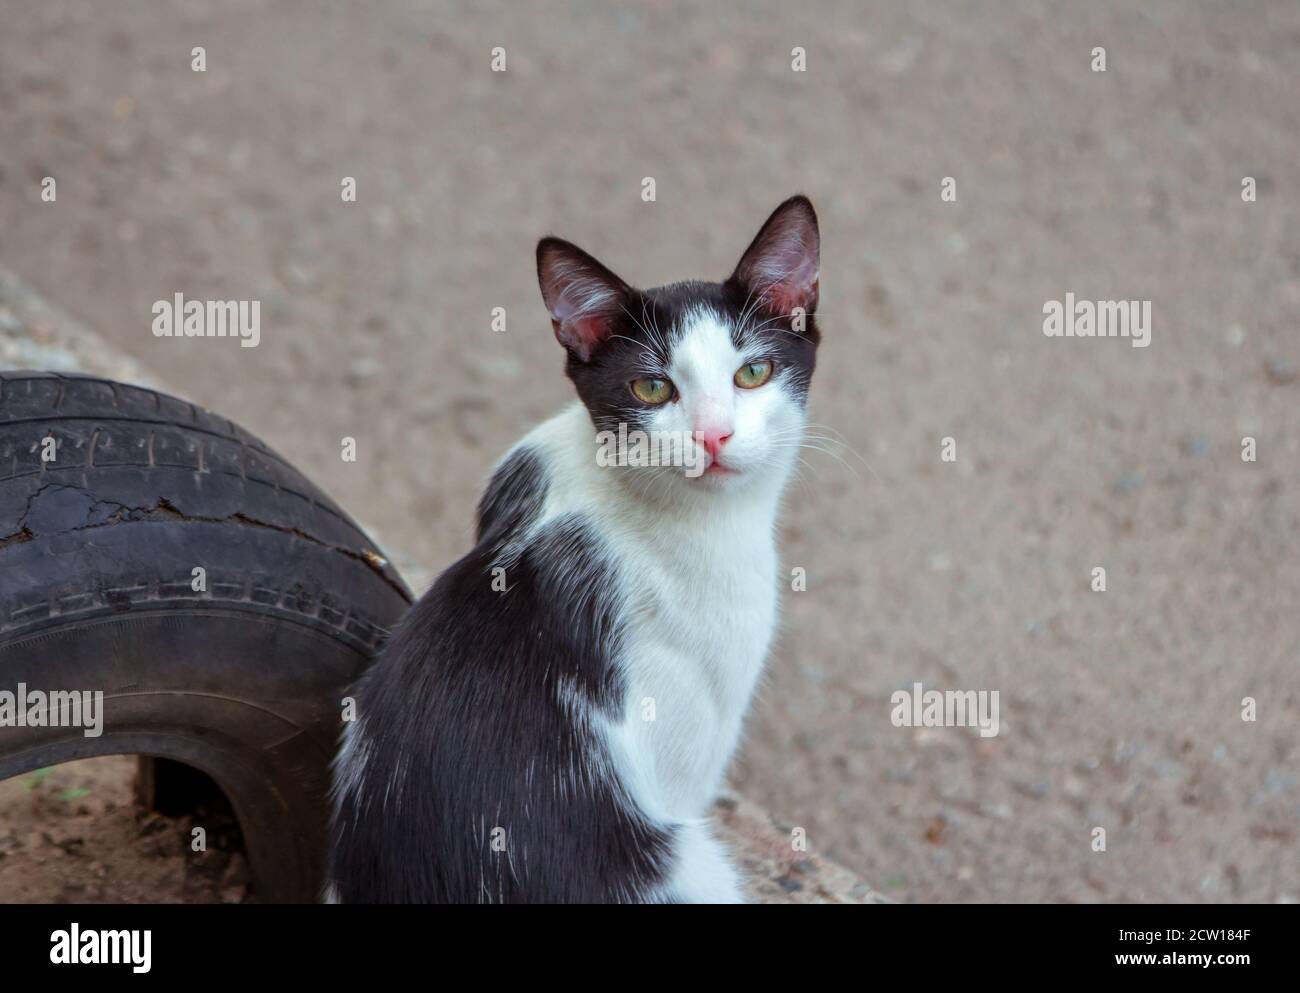 Cute stray black and white cat with green eyes and pink nose sitting on the city street Stock Photo